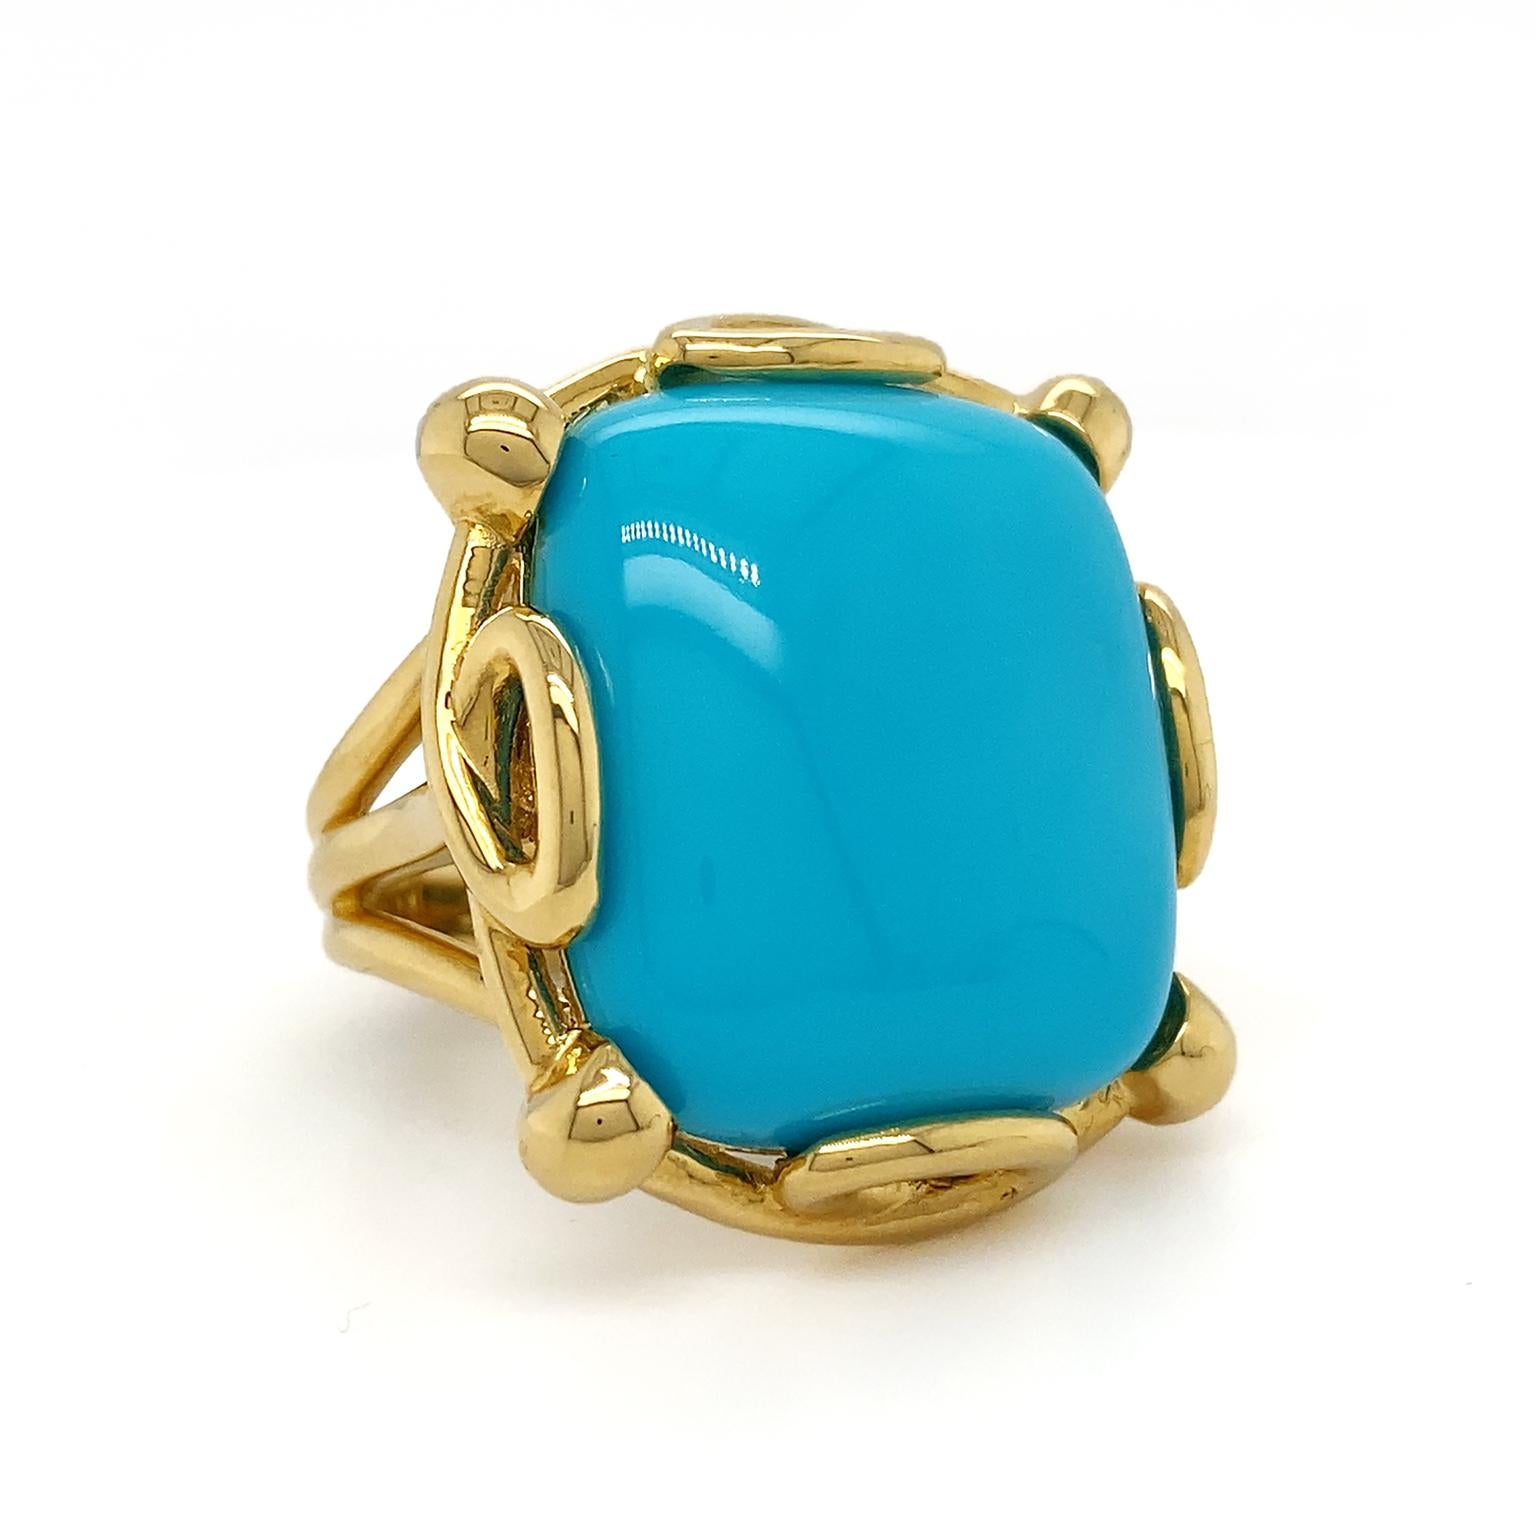 Turquoise displays its vibrant cool toned hue in this ring. Carefully selected for its opaque beauty, the carved cabochon of the gem is set by a pattern of 18k yellow gold loops and prongs. The gold also further accentuates the distinct shade of the